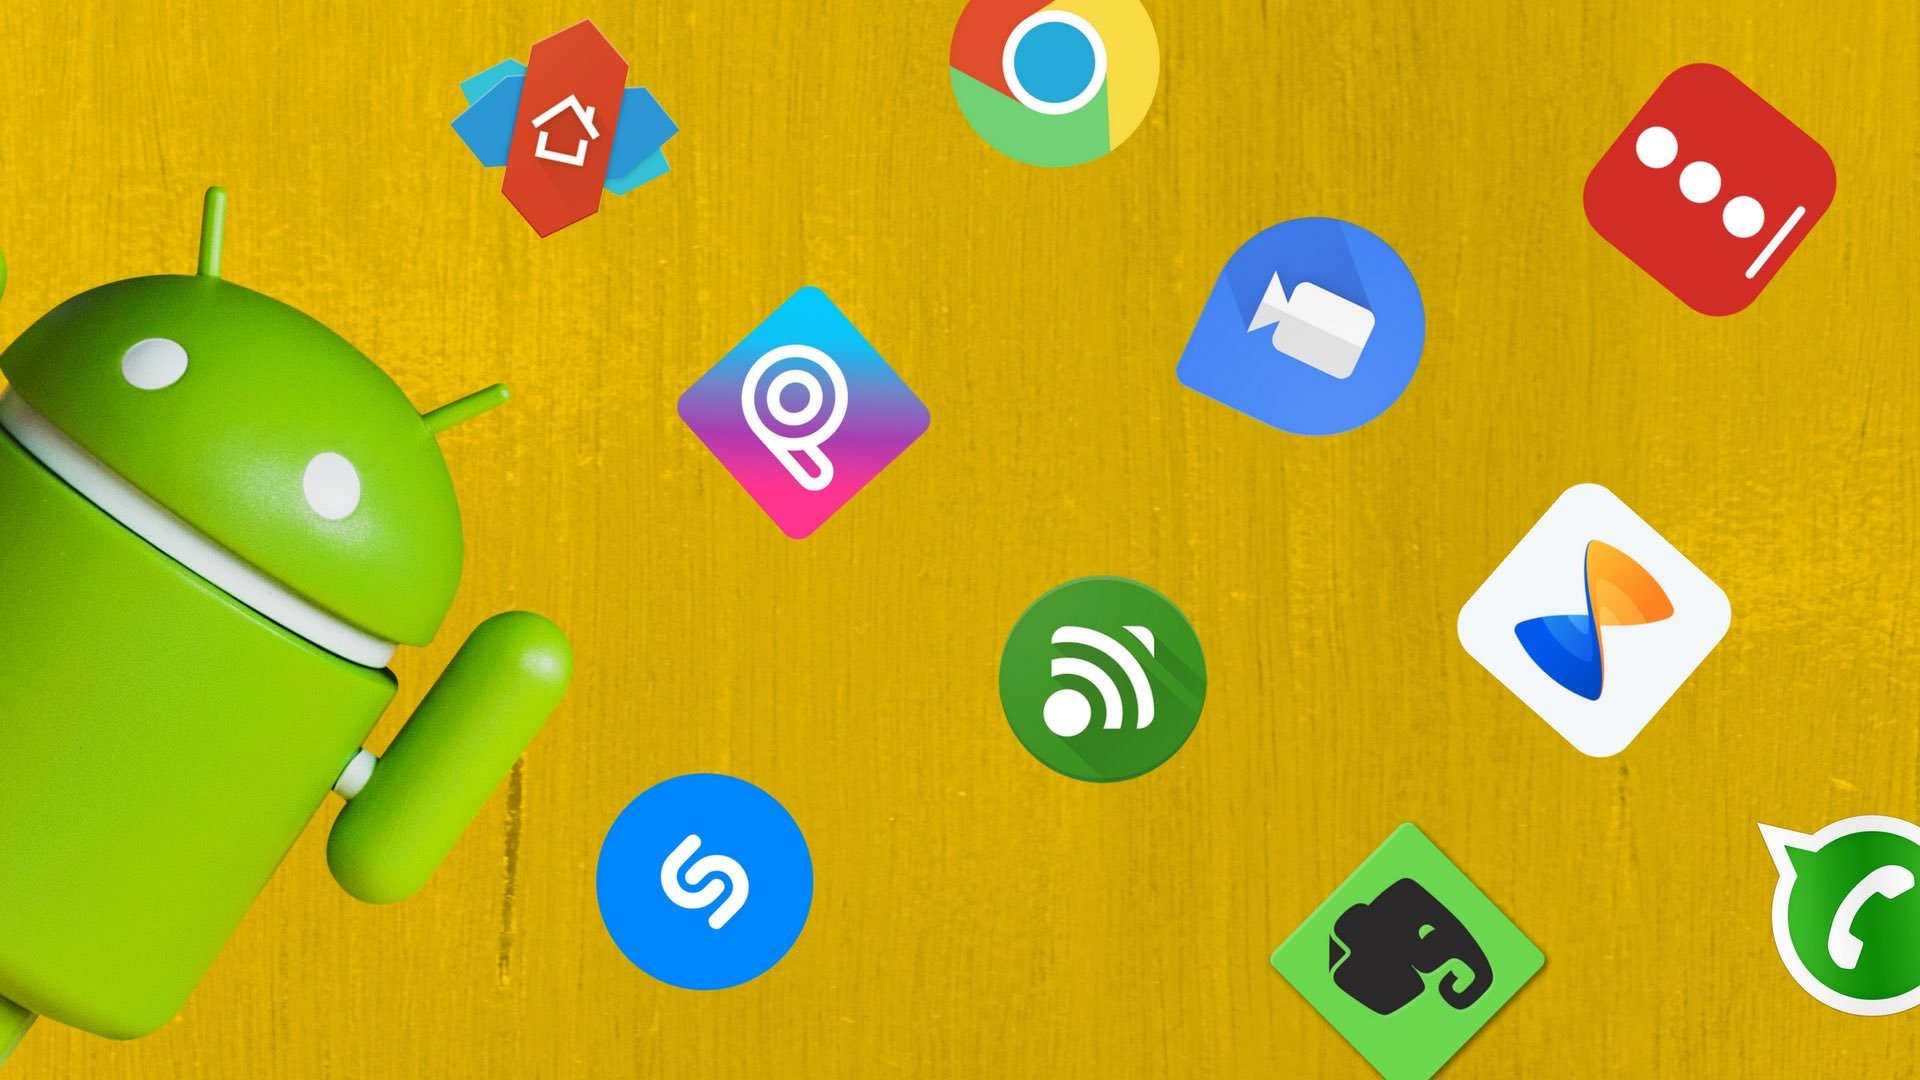 best apps for android